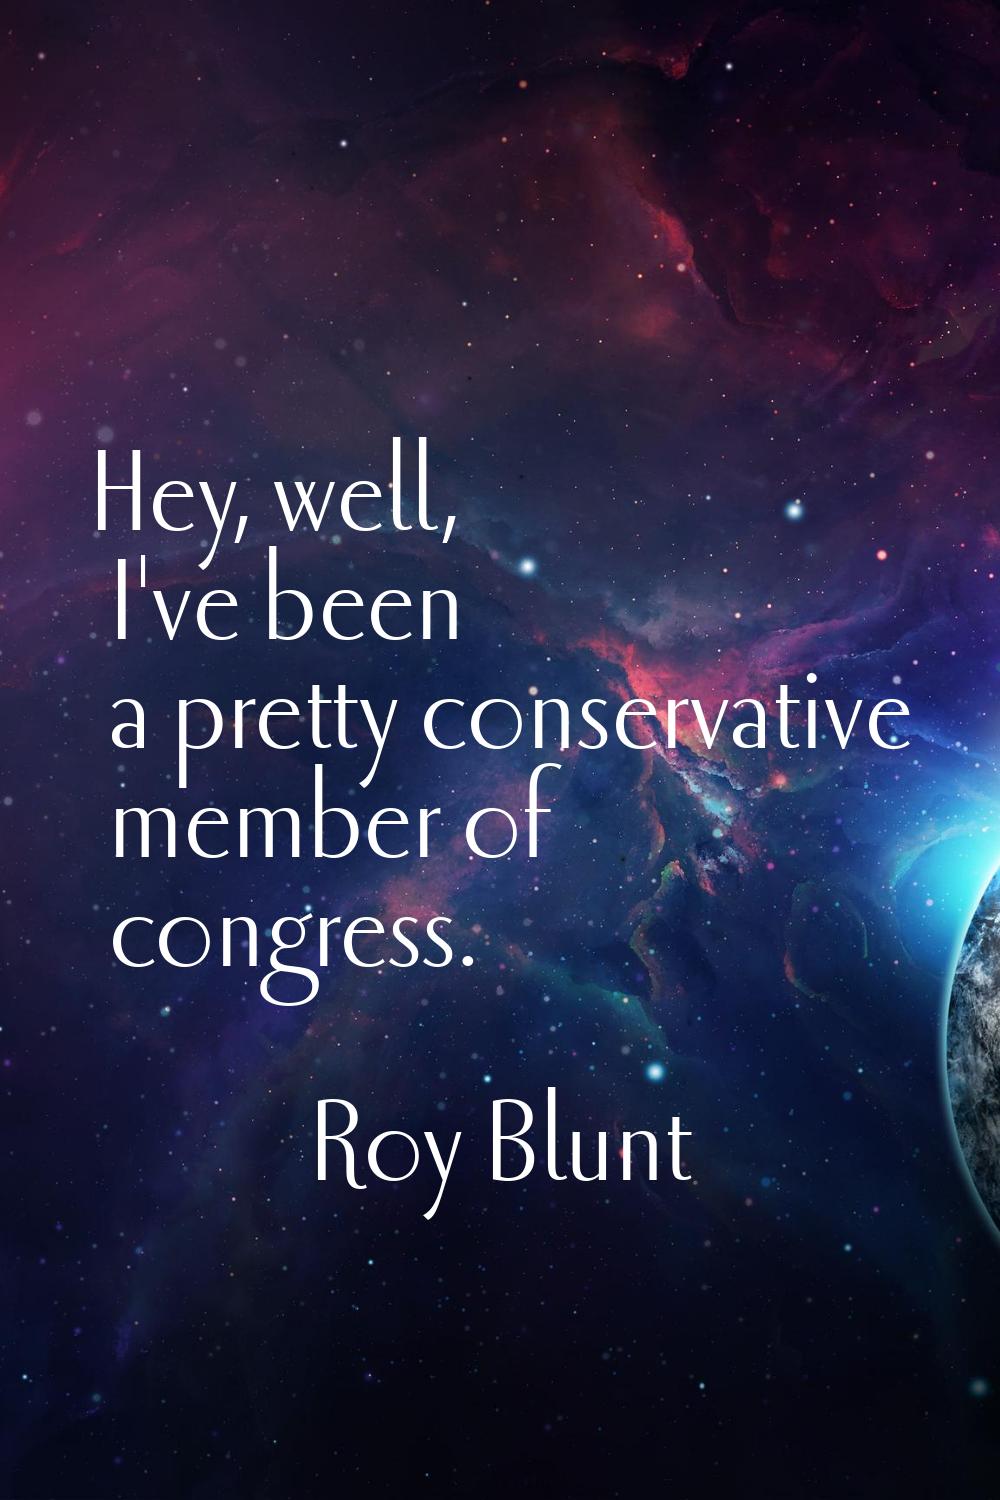 Hey, well, I've been a pretty conservative member of congress.